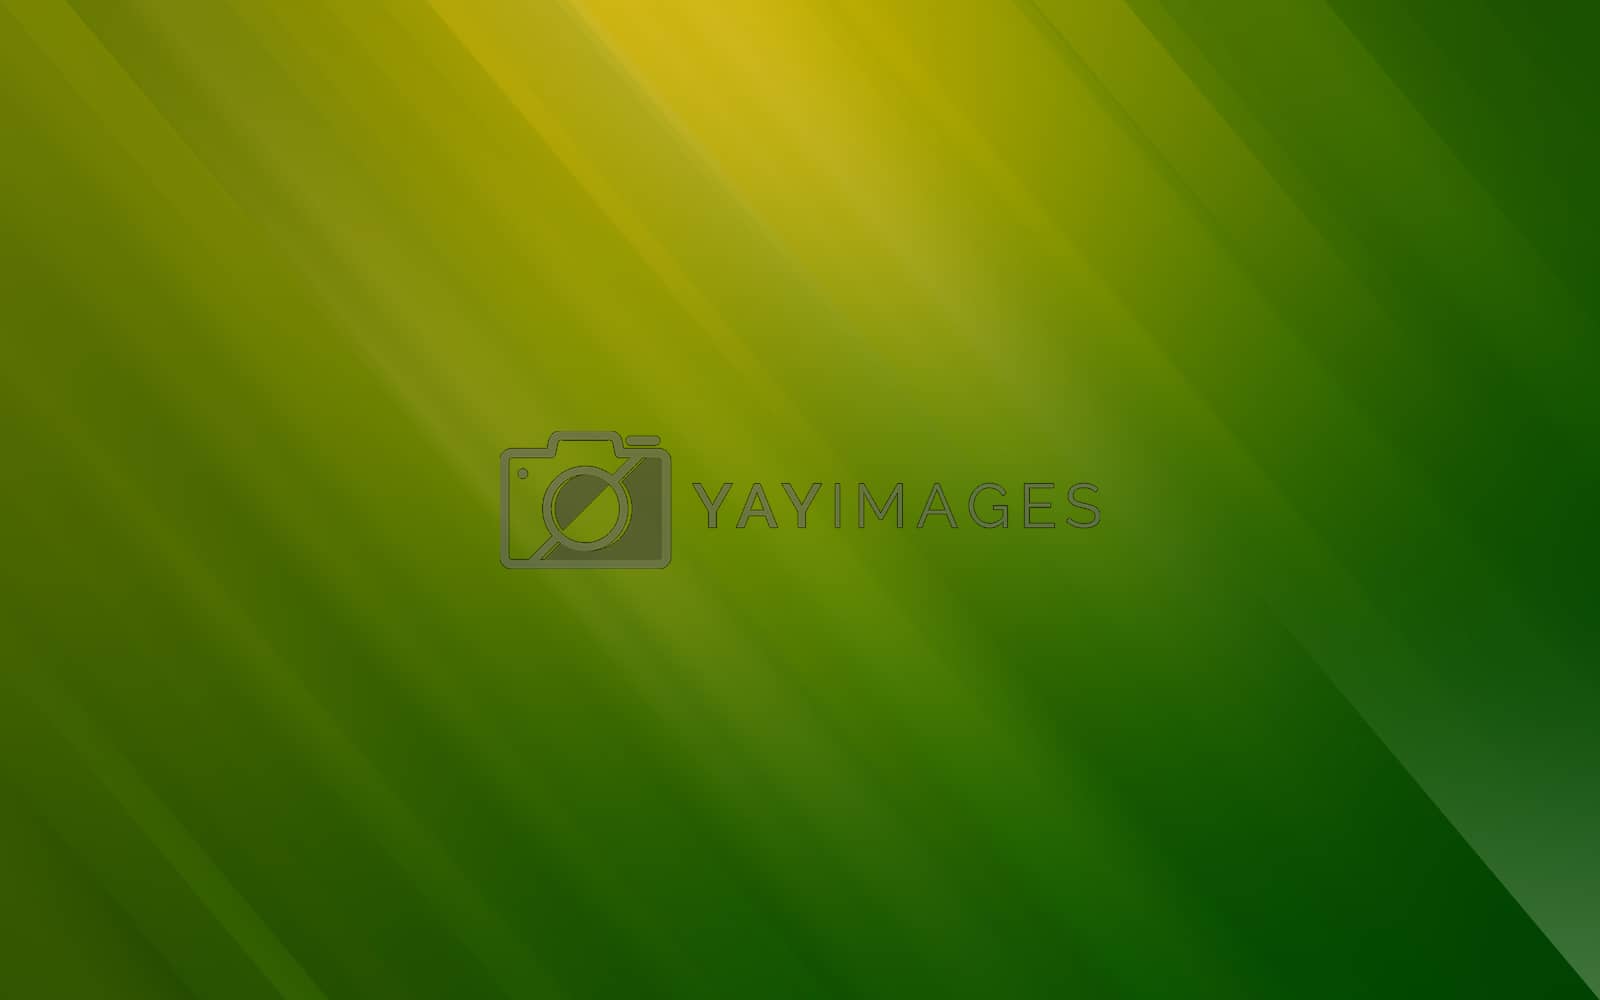 Royalty free image of motion blur abstract background by teerawit